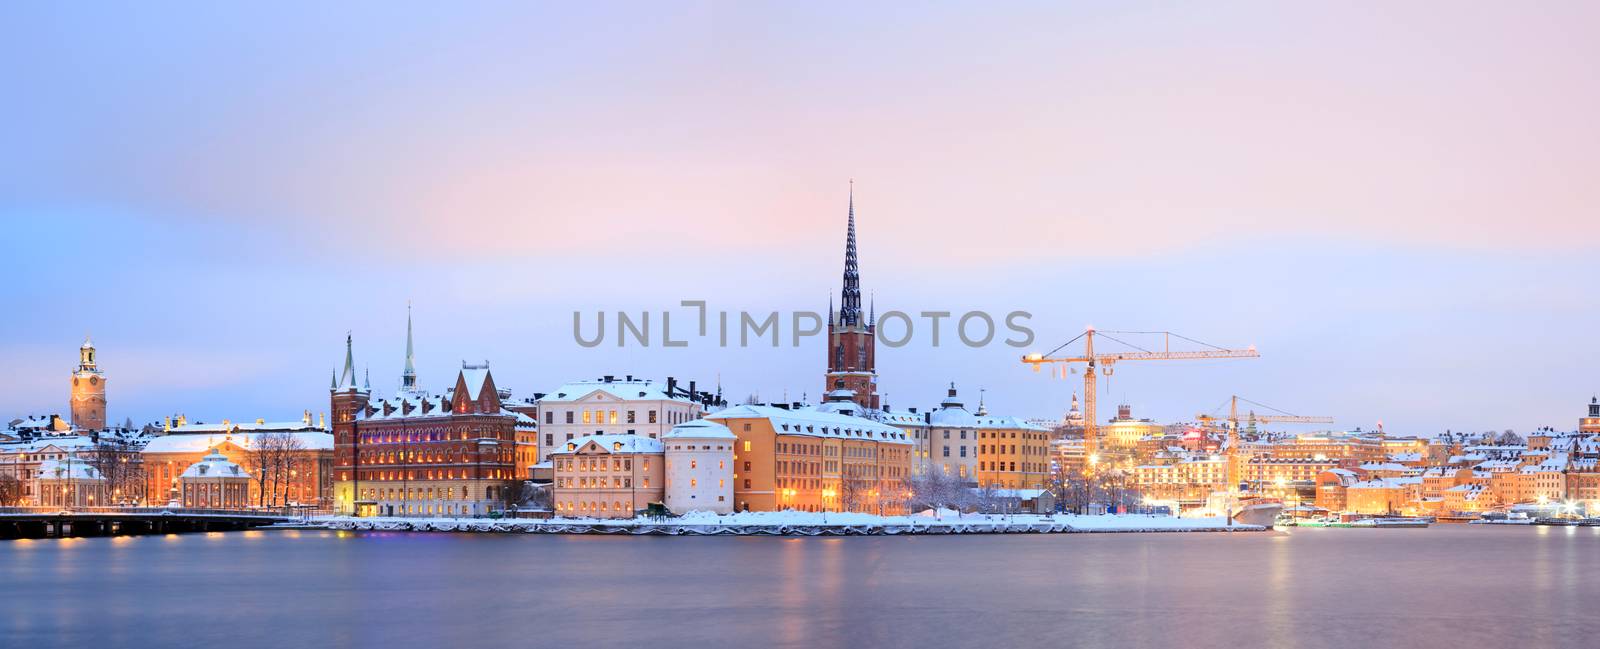 Stockholm Panoramic by vichie81